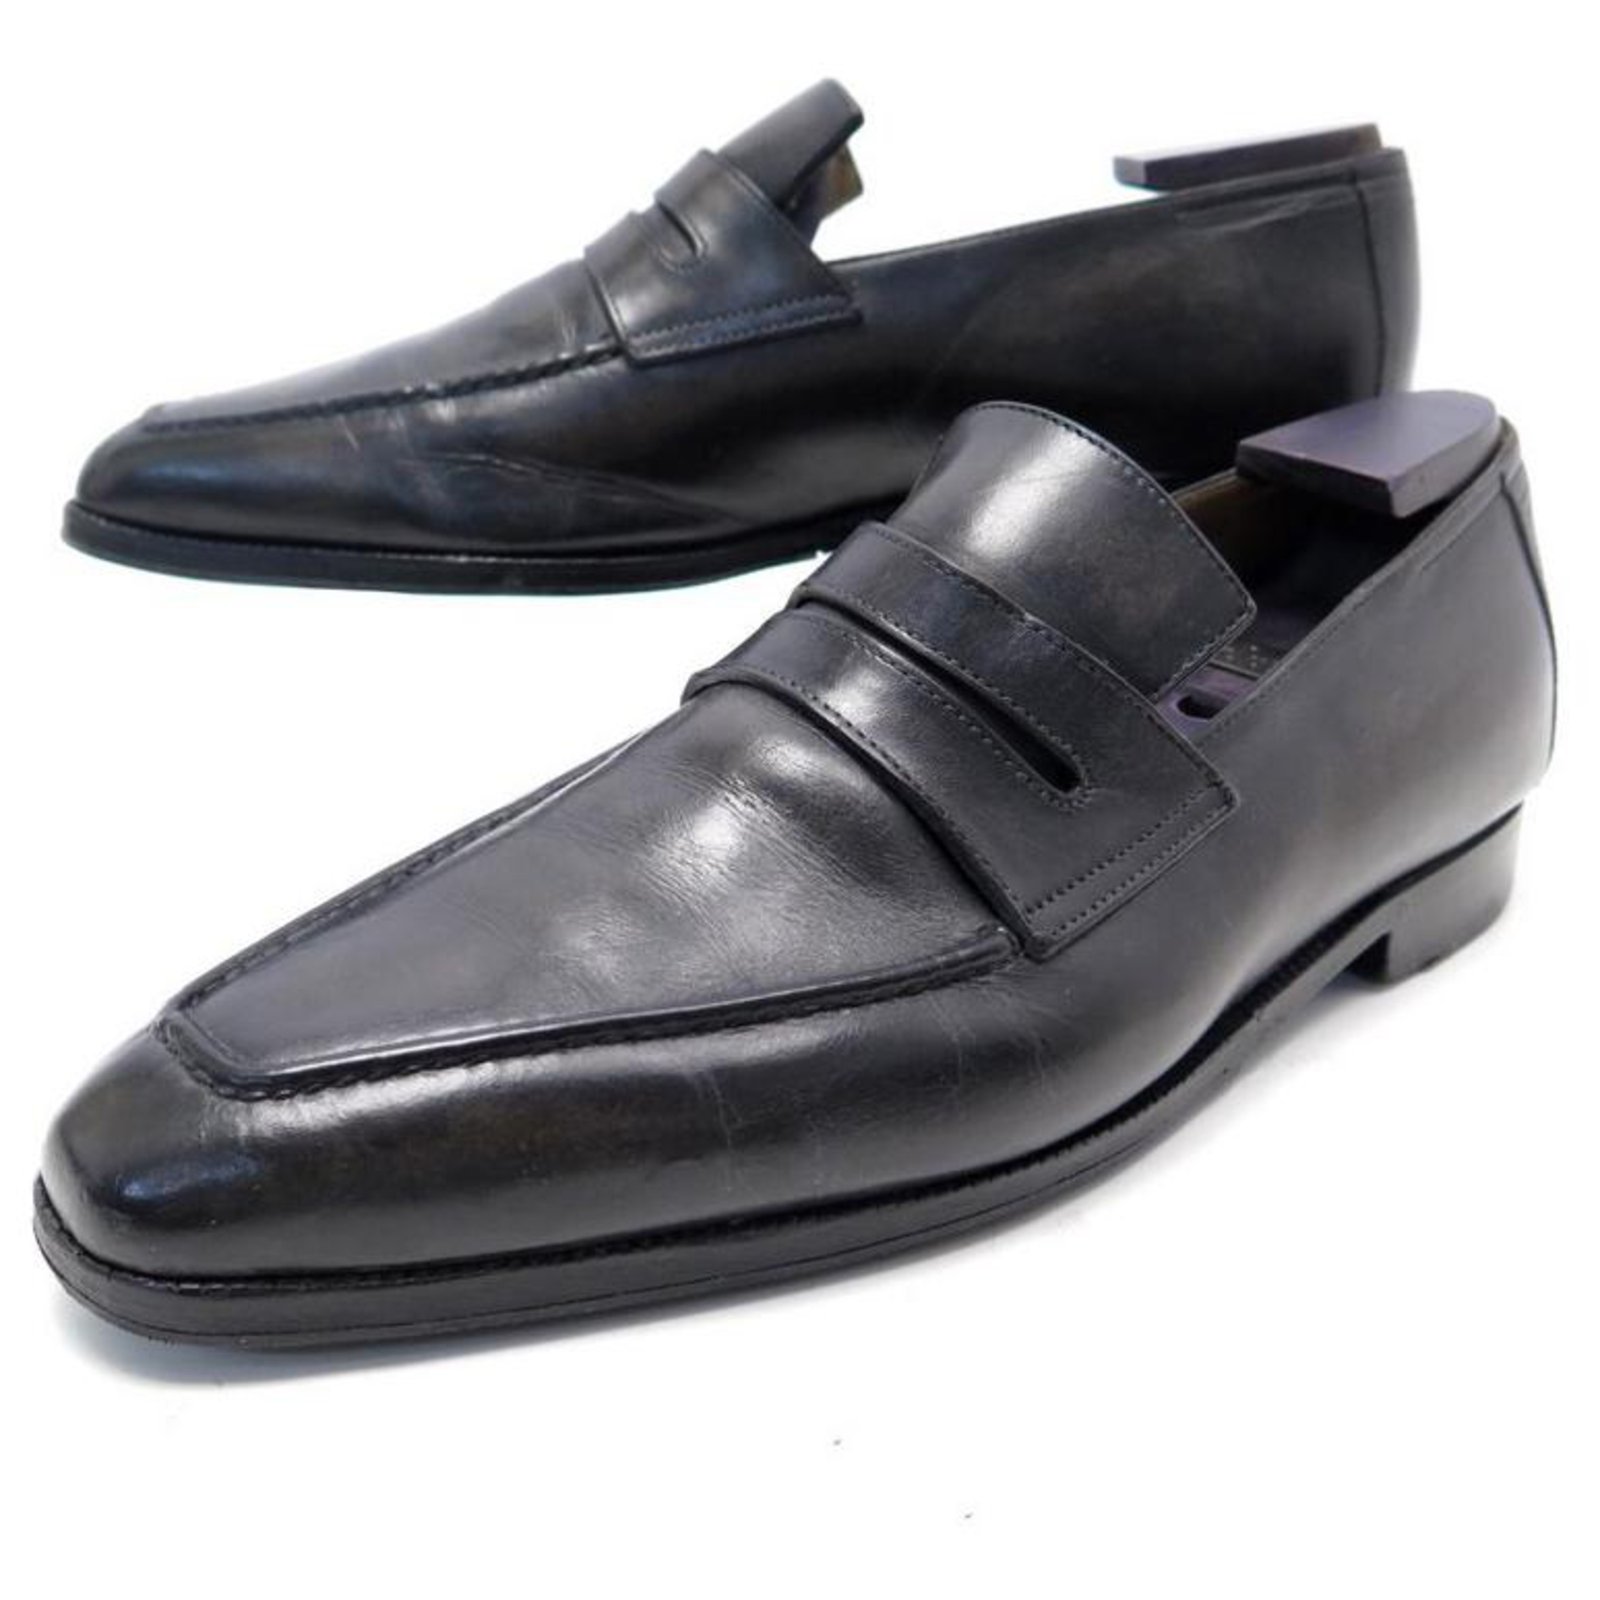 BERLUTI SHOES ANDY DEMESURE LOAFERS 8.5 42.5 LEATHER STRIPPERS SHOES ...